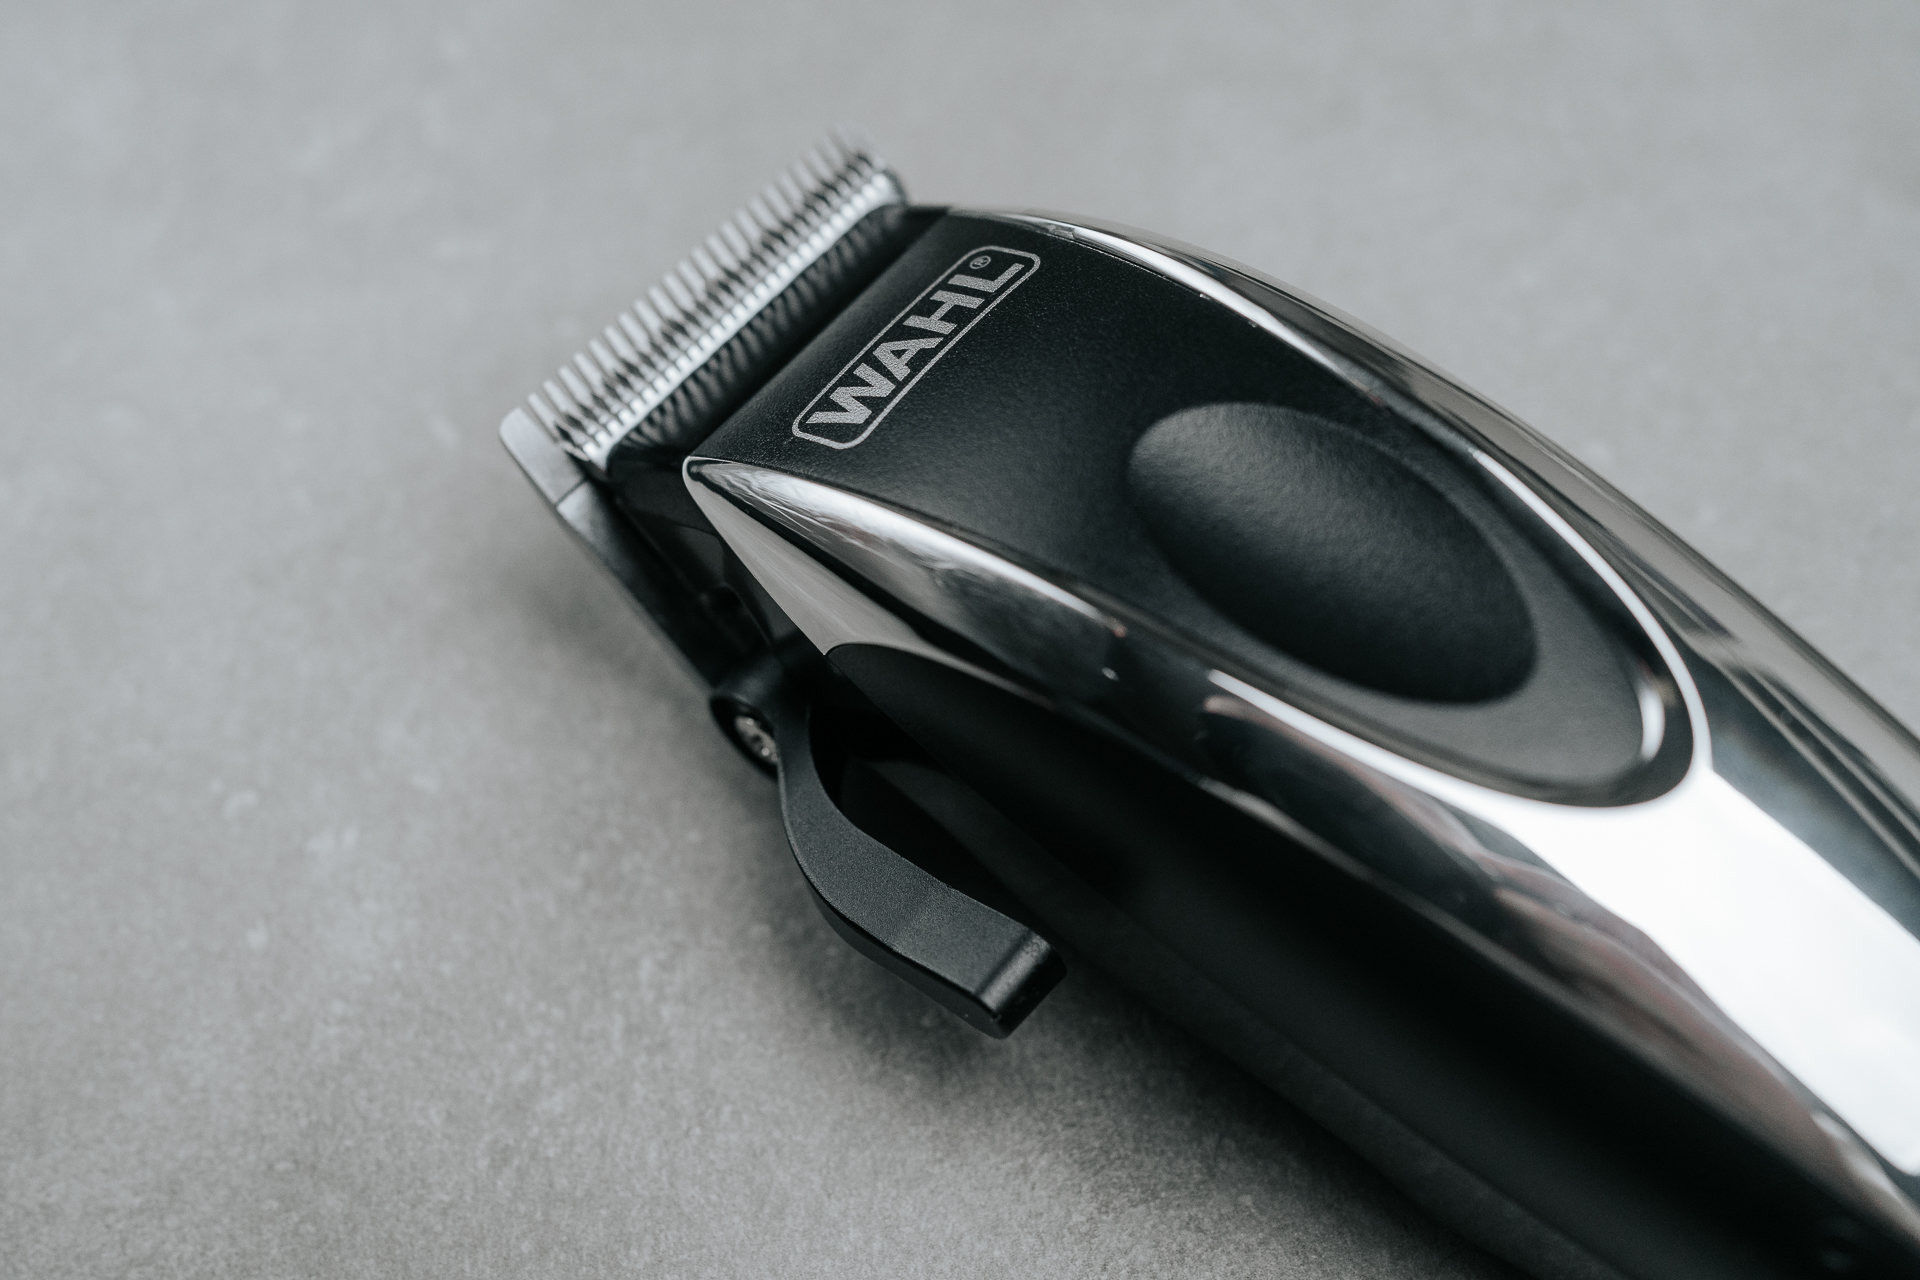 Home Pro (2616) | Wahl Global